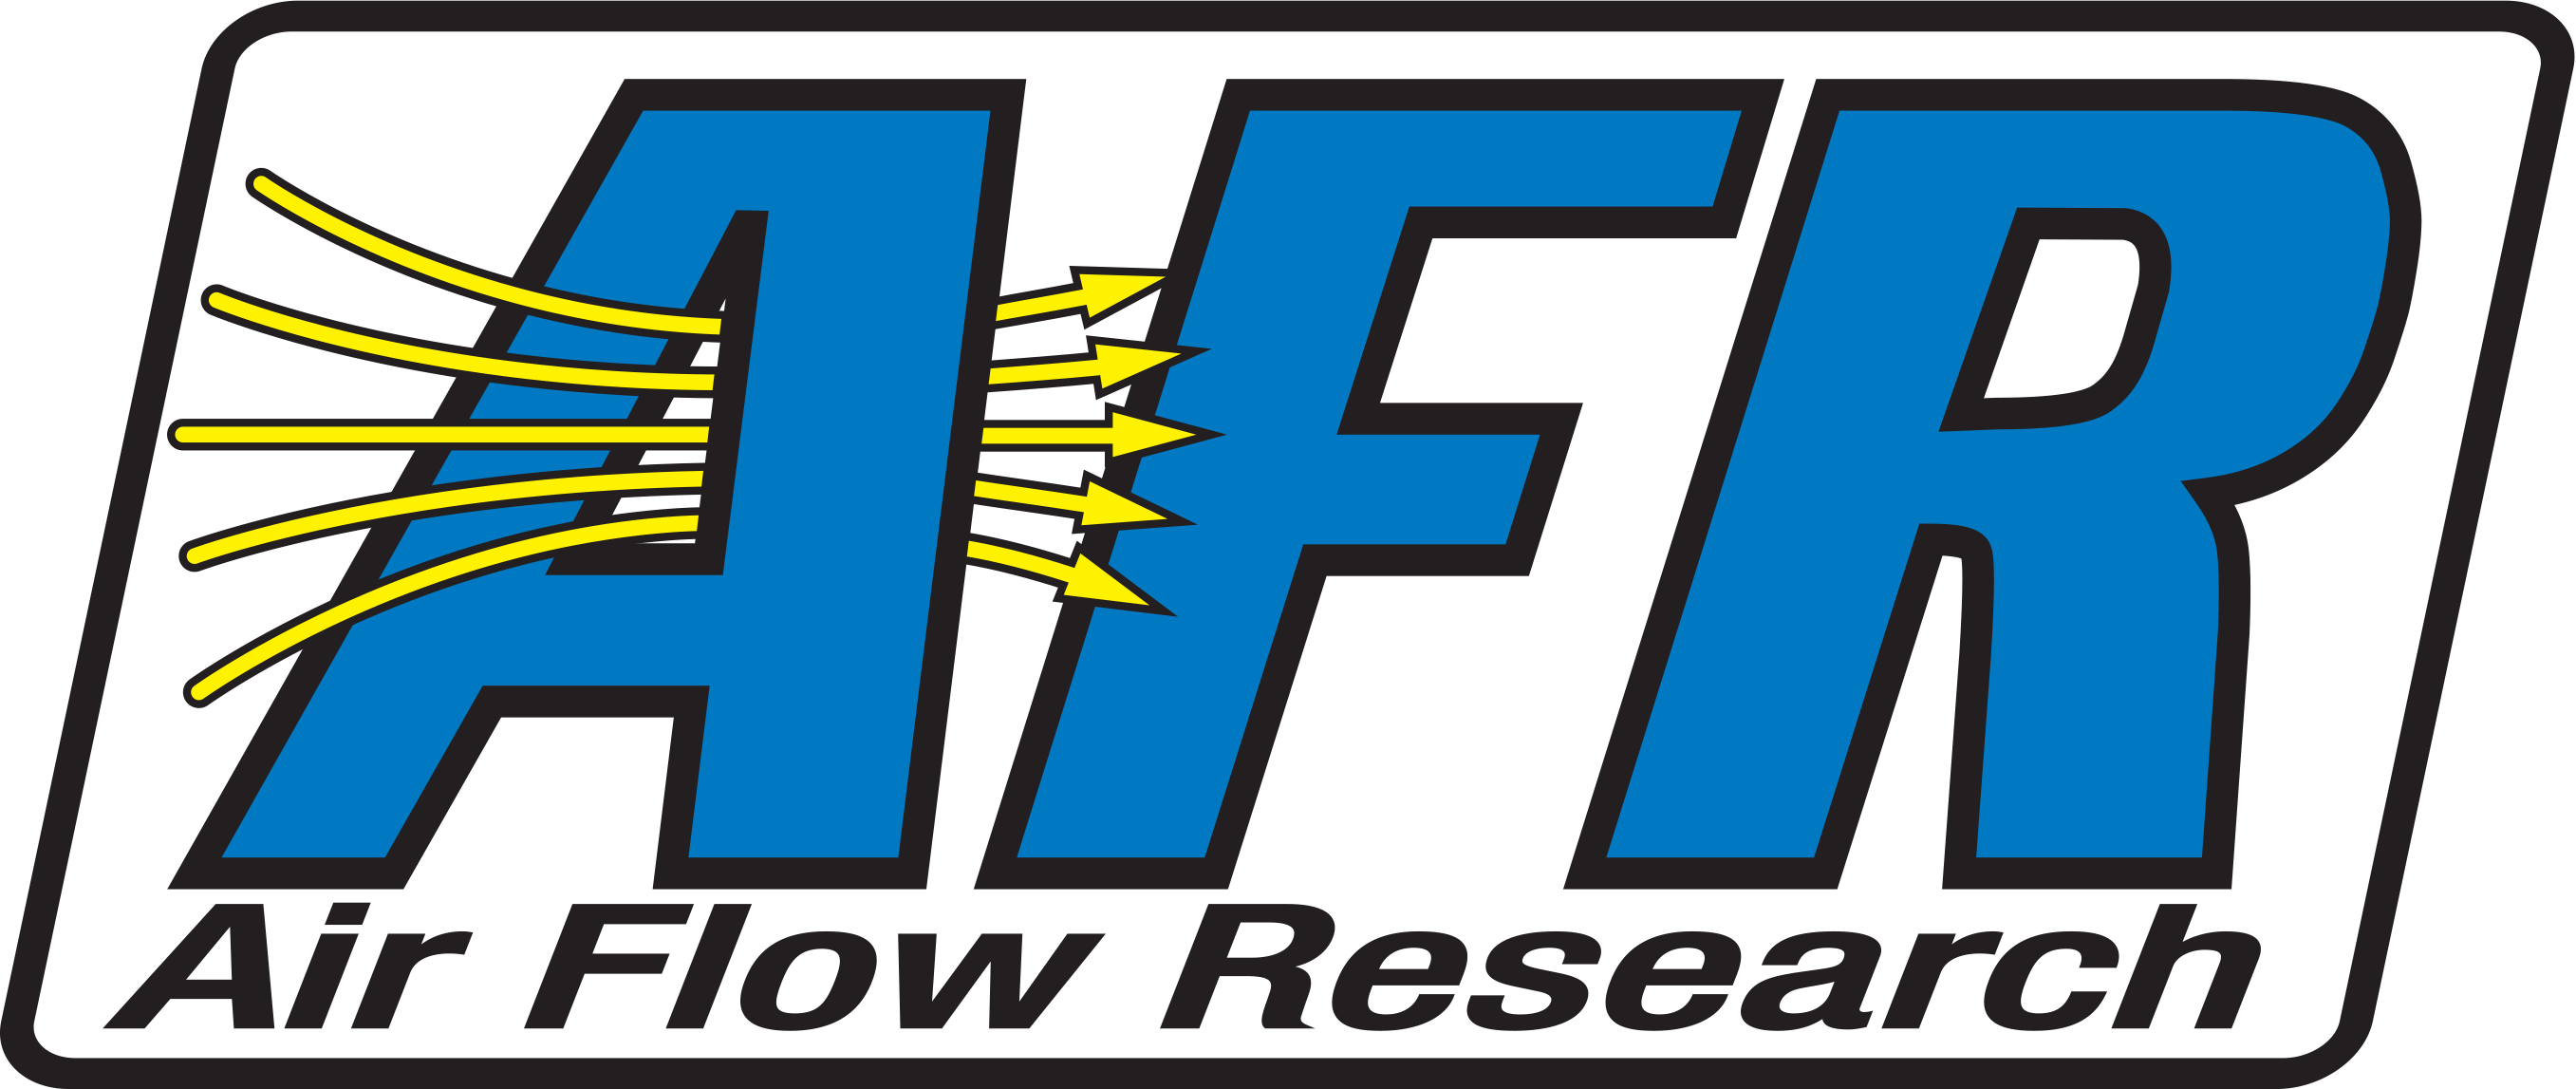 Air Flow Research (9725) Apparel/Promotional